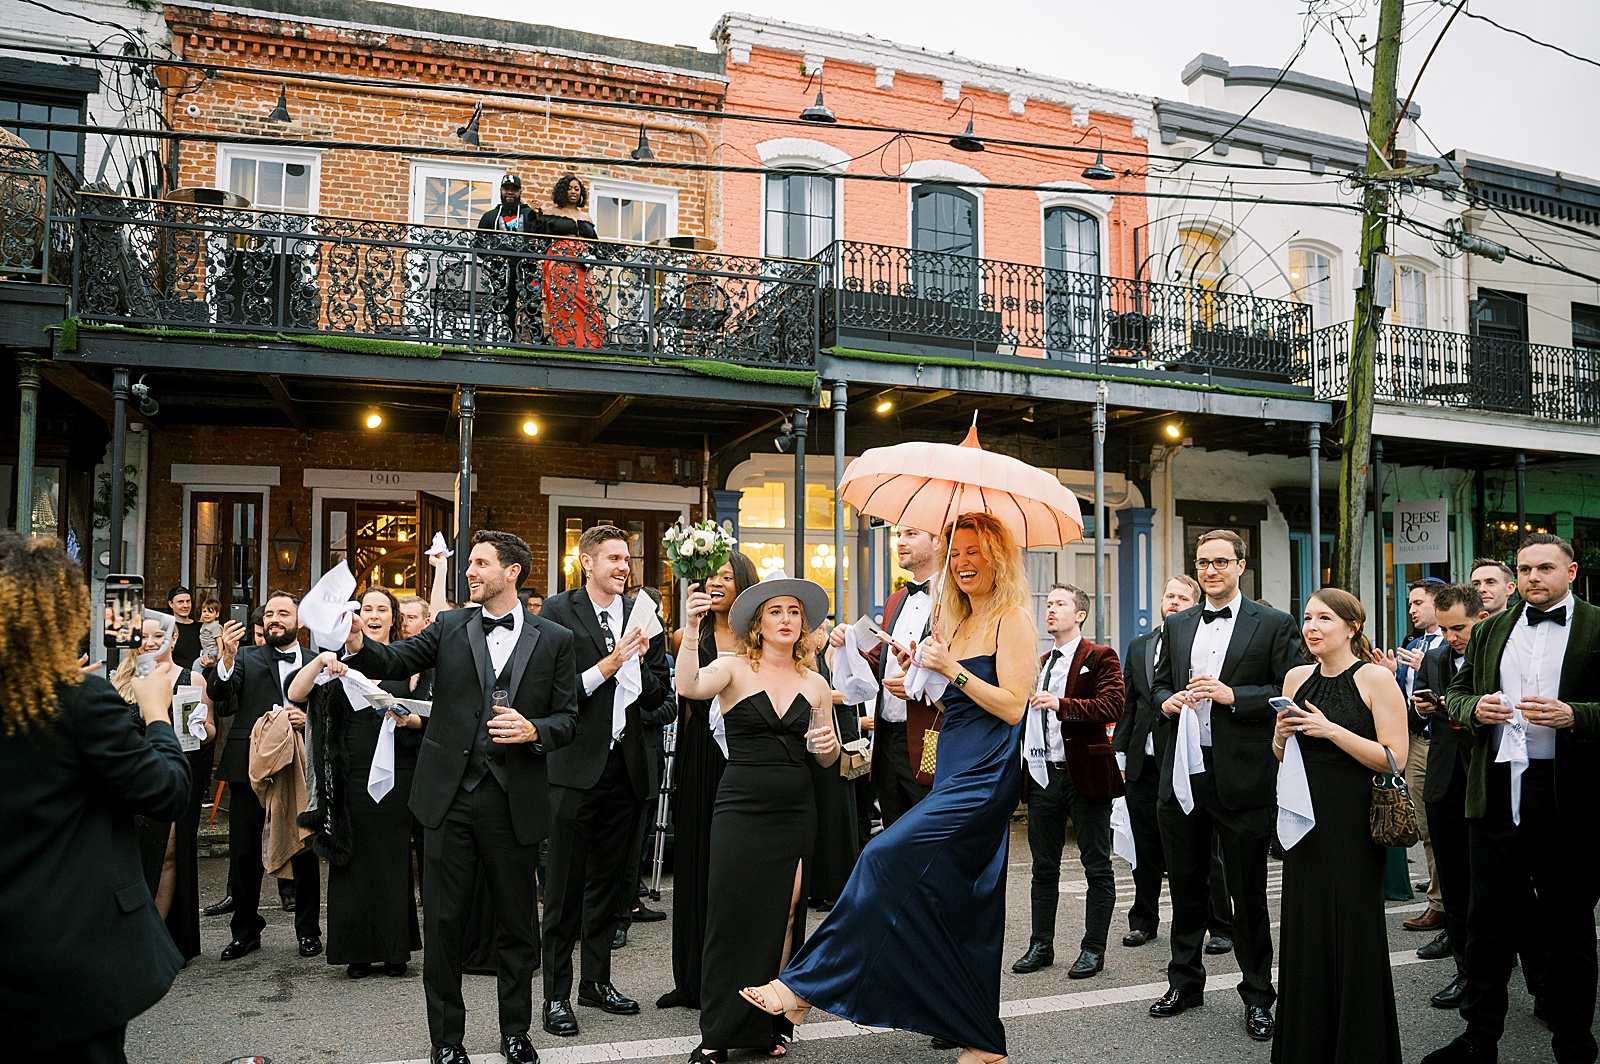 Wedding guests dance down a New Orleans street during a wedding second line.